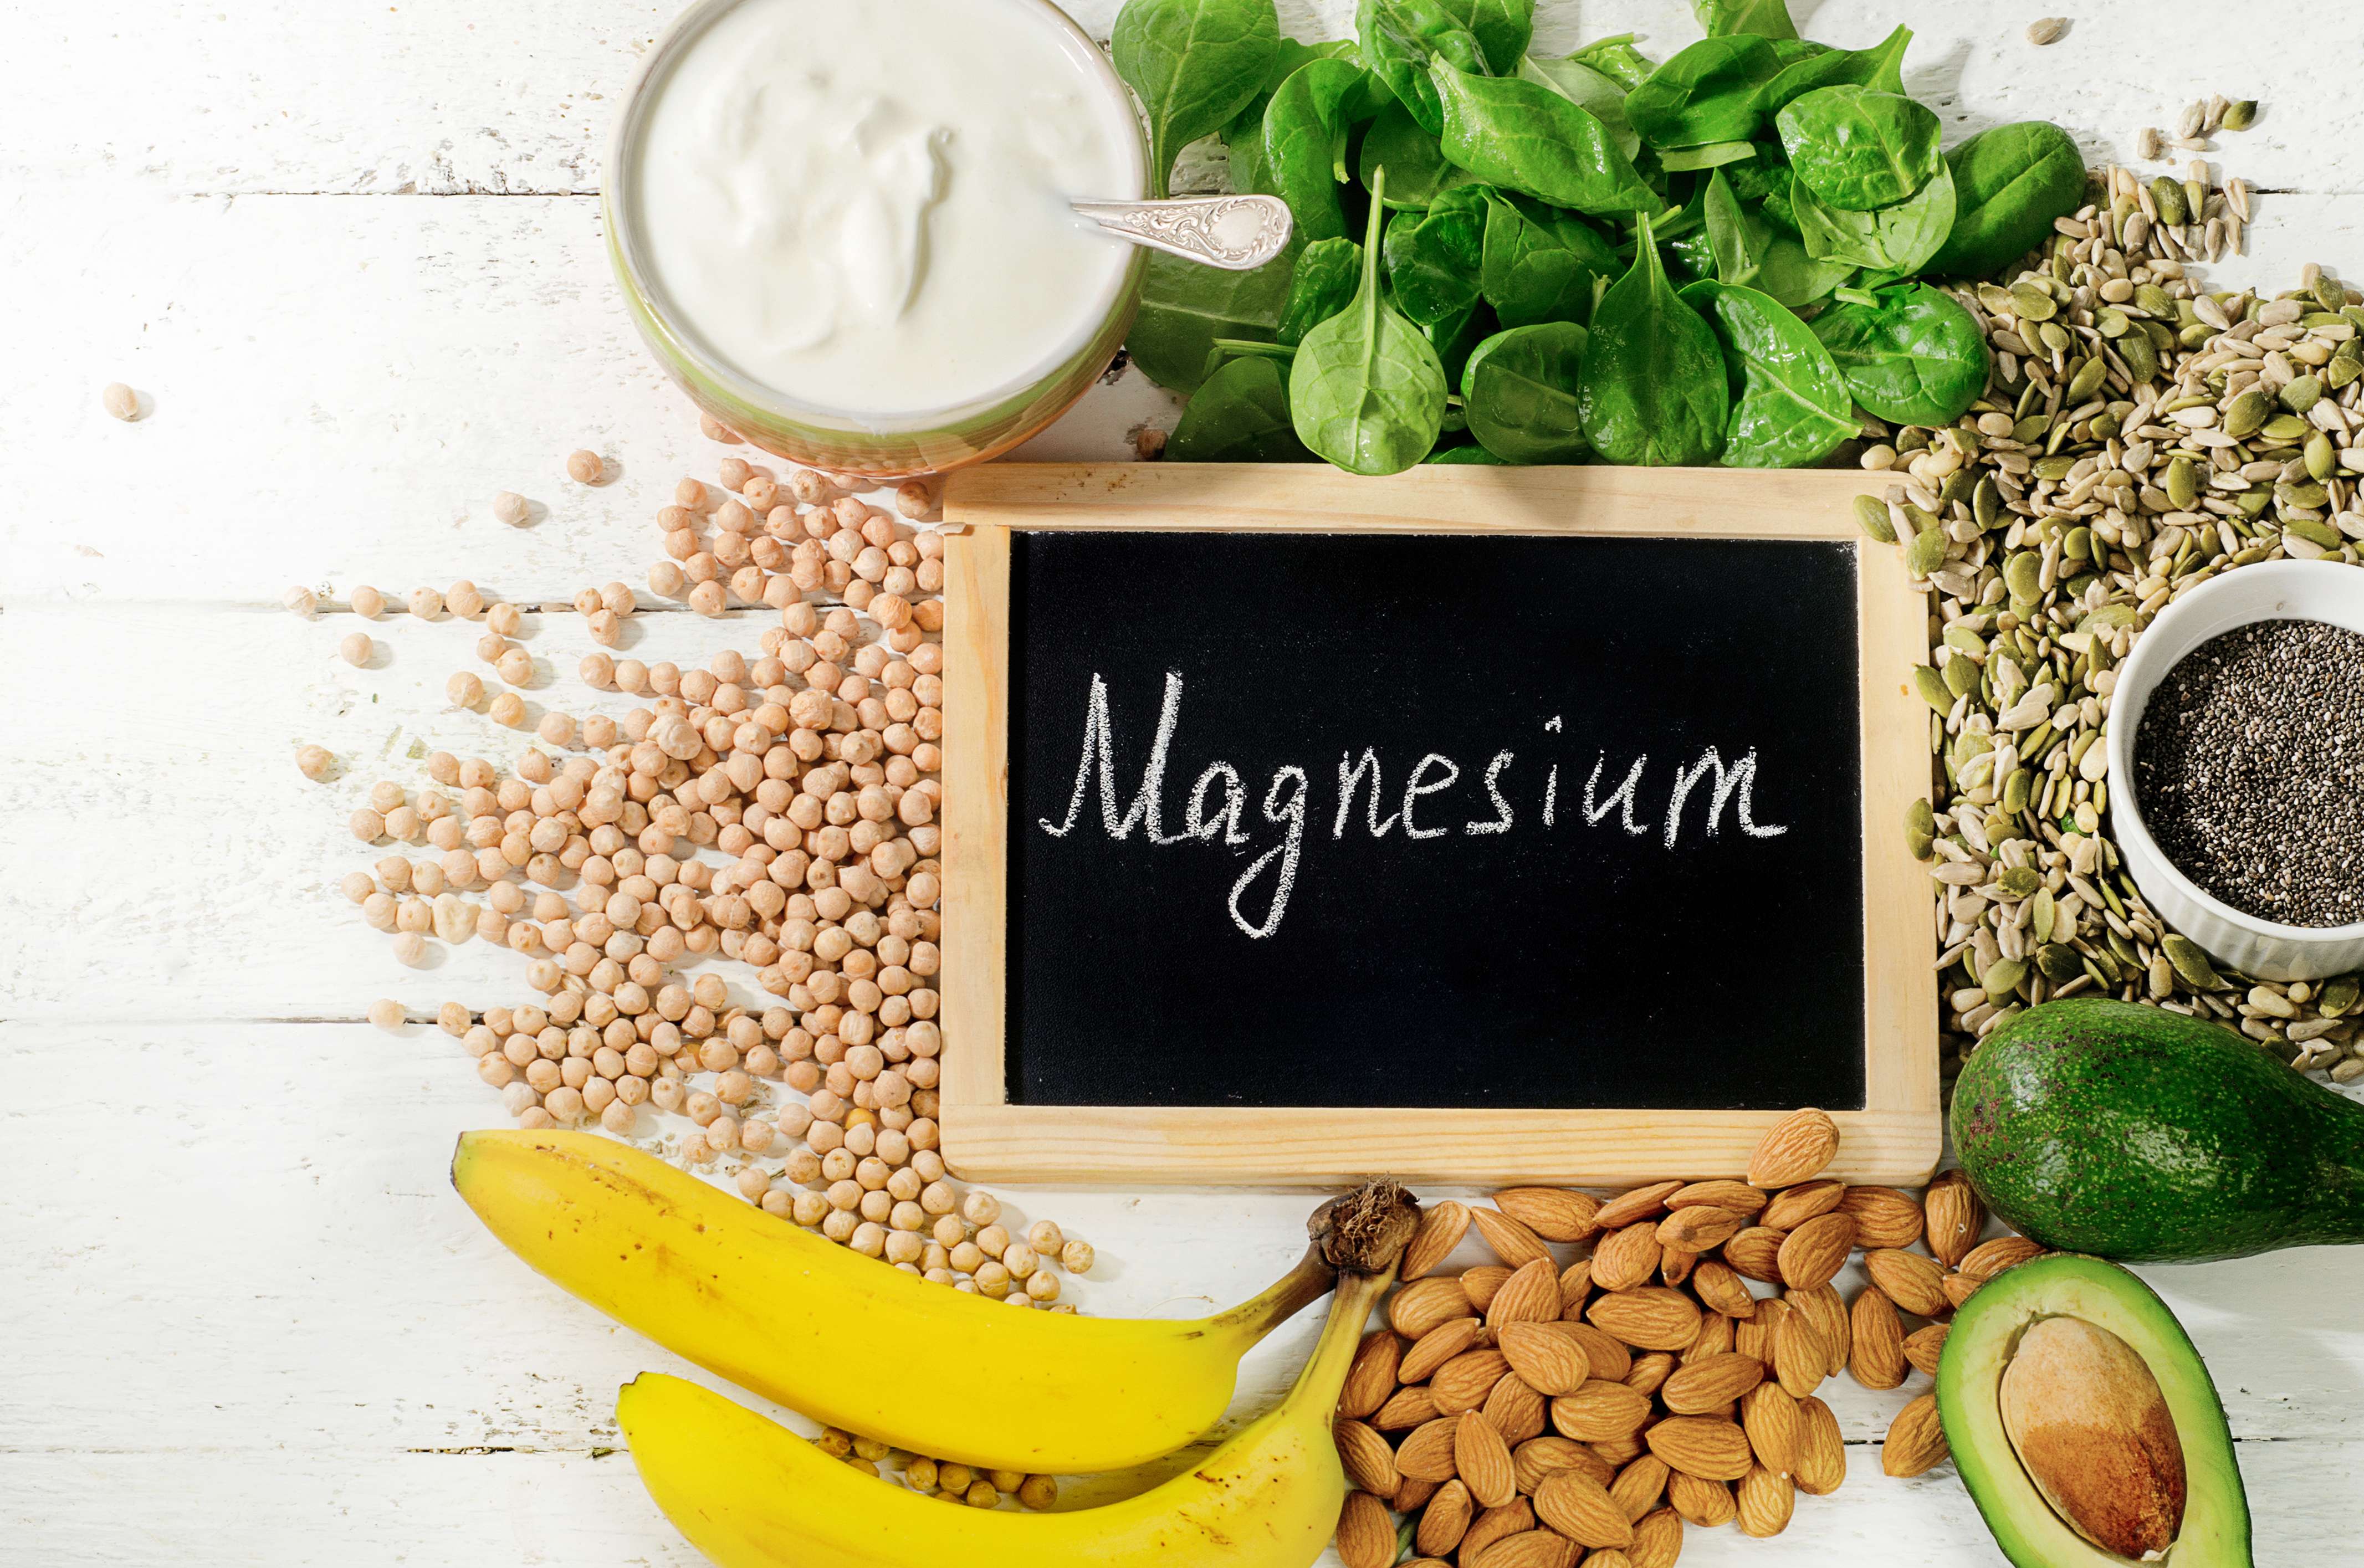 A diet rich in magnesium may help stave off life-threatening illness.